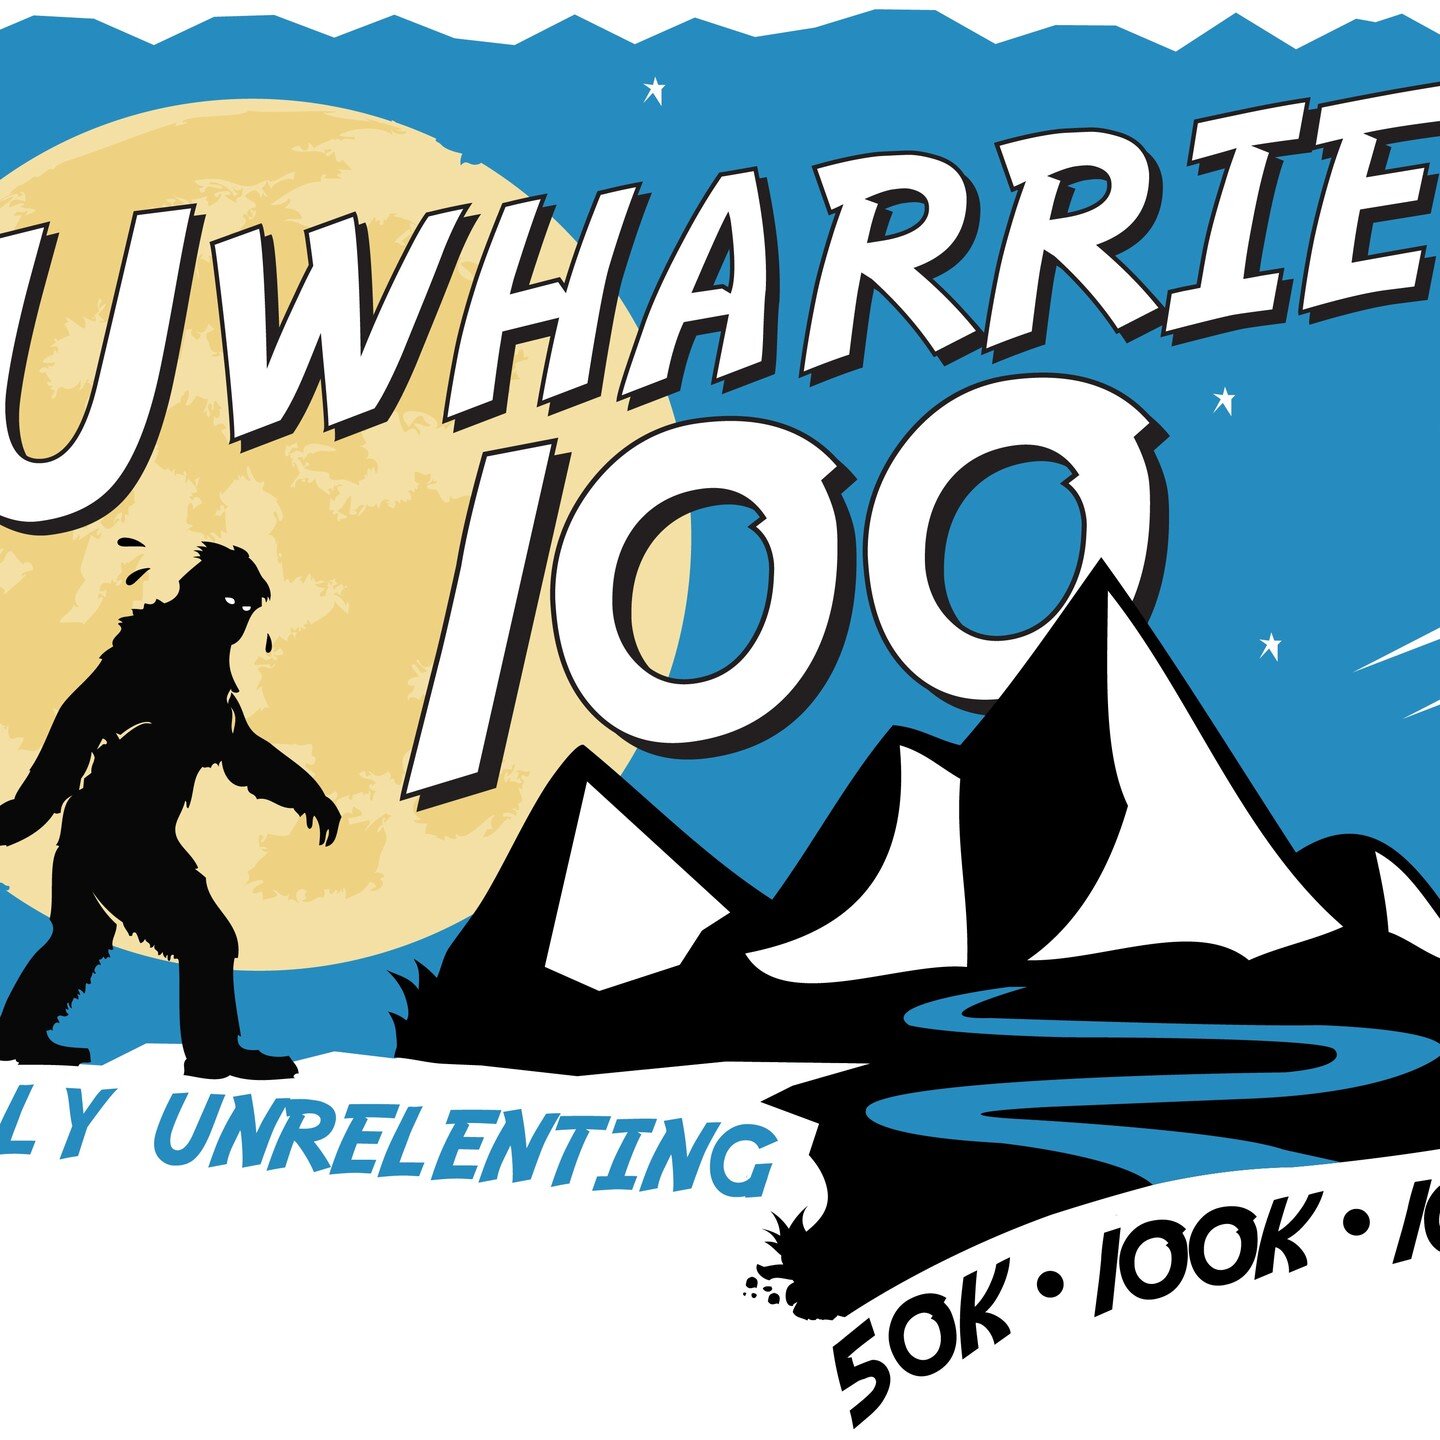 60 DAYS OUT and 38 SPOTS LEFT for the Uwharrie100k/100m on October, 22nd 2022. 

If you've had your finger on the button but have commitment issues; today's the day to send it!

All the Trail Love,
Ryan and Meghaan
#simplyunrelenting